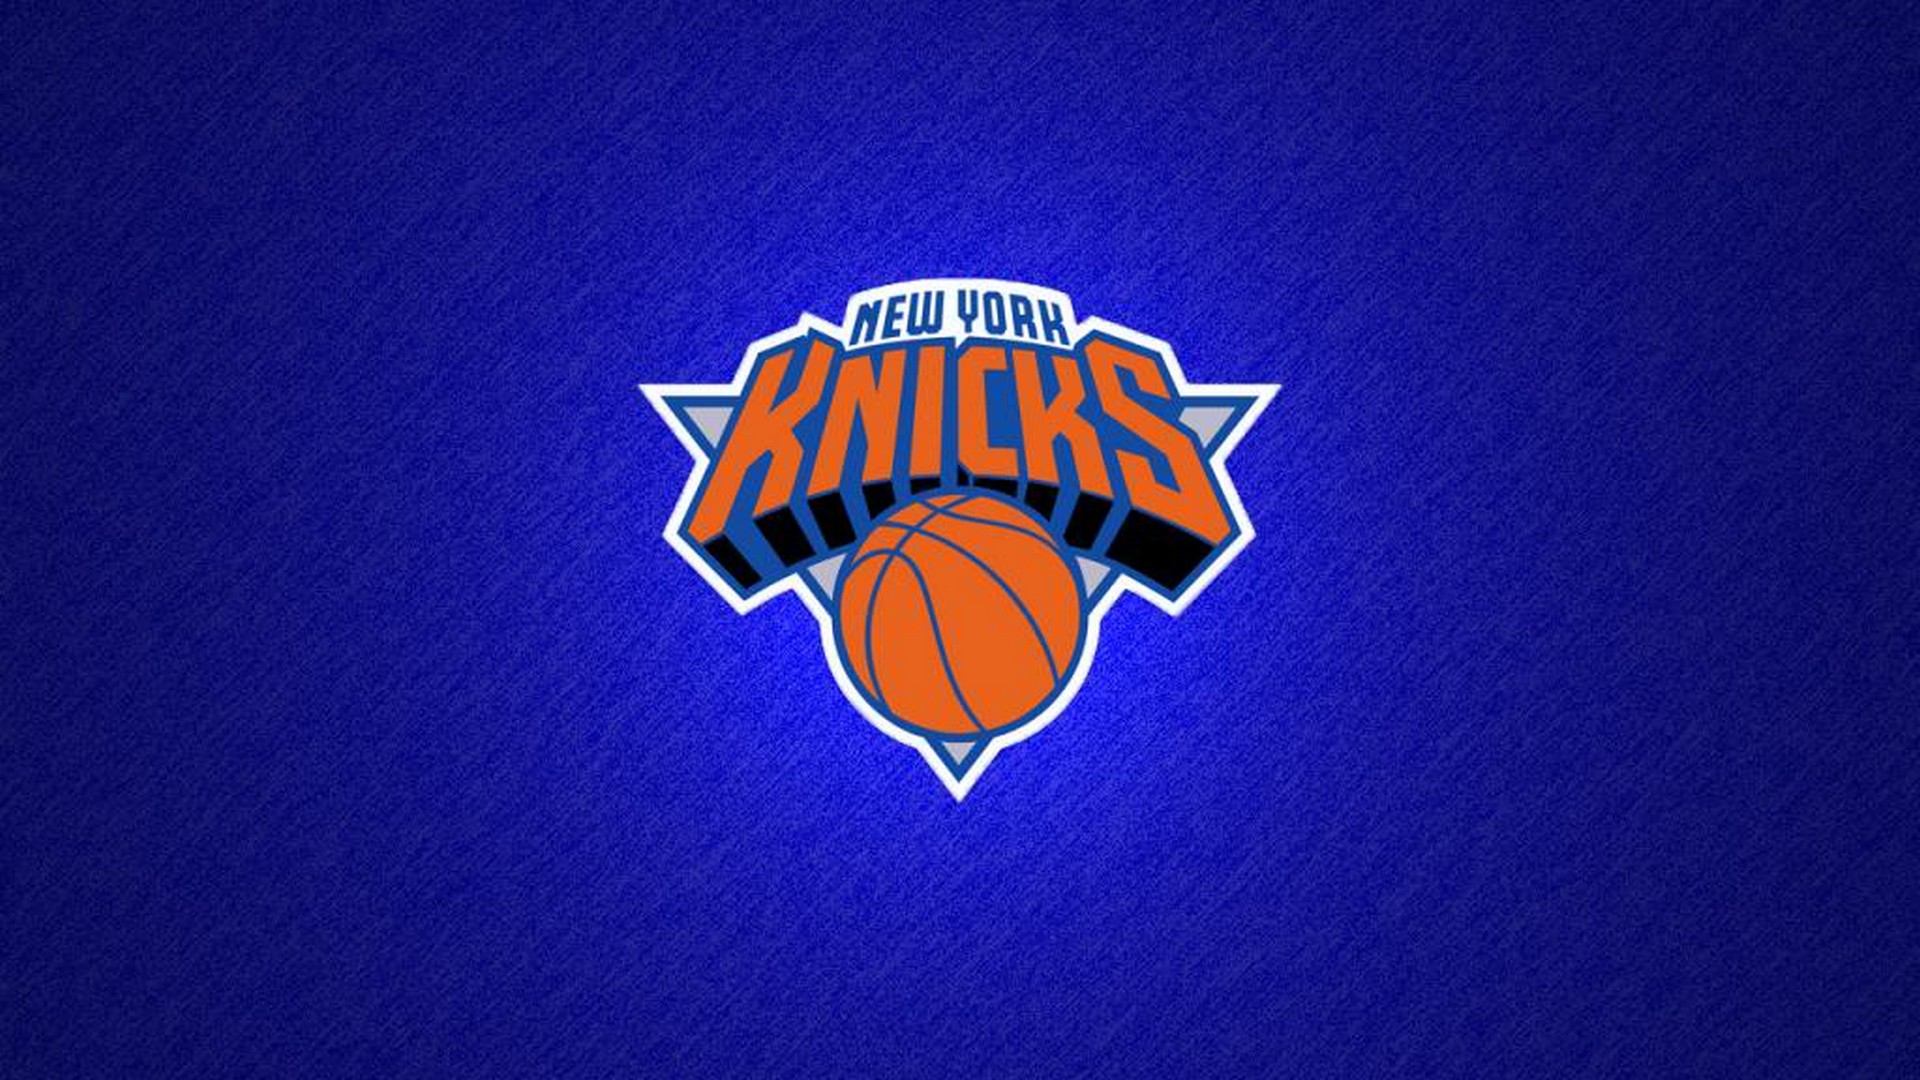 New York Knicks HD Wallpapers with image dimensions 1920x1080 pixel. You can make this wallpaper for your Desktop Computer Backgrounds, Windows or Mac Screensavers, iPhone Lock screen, Tablet or Android and another Mobile Phone device